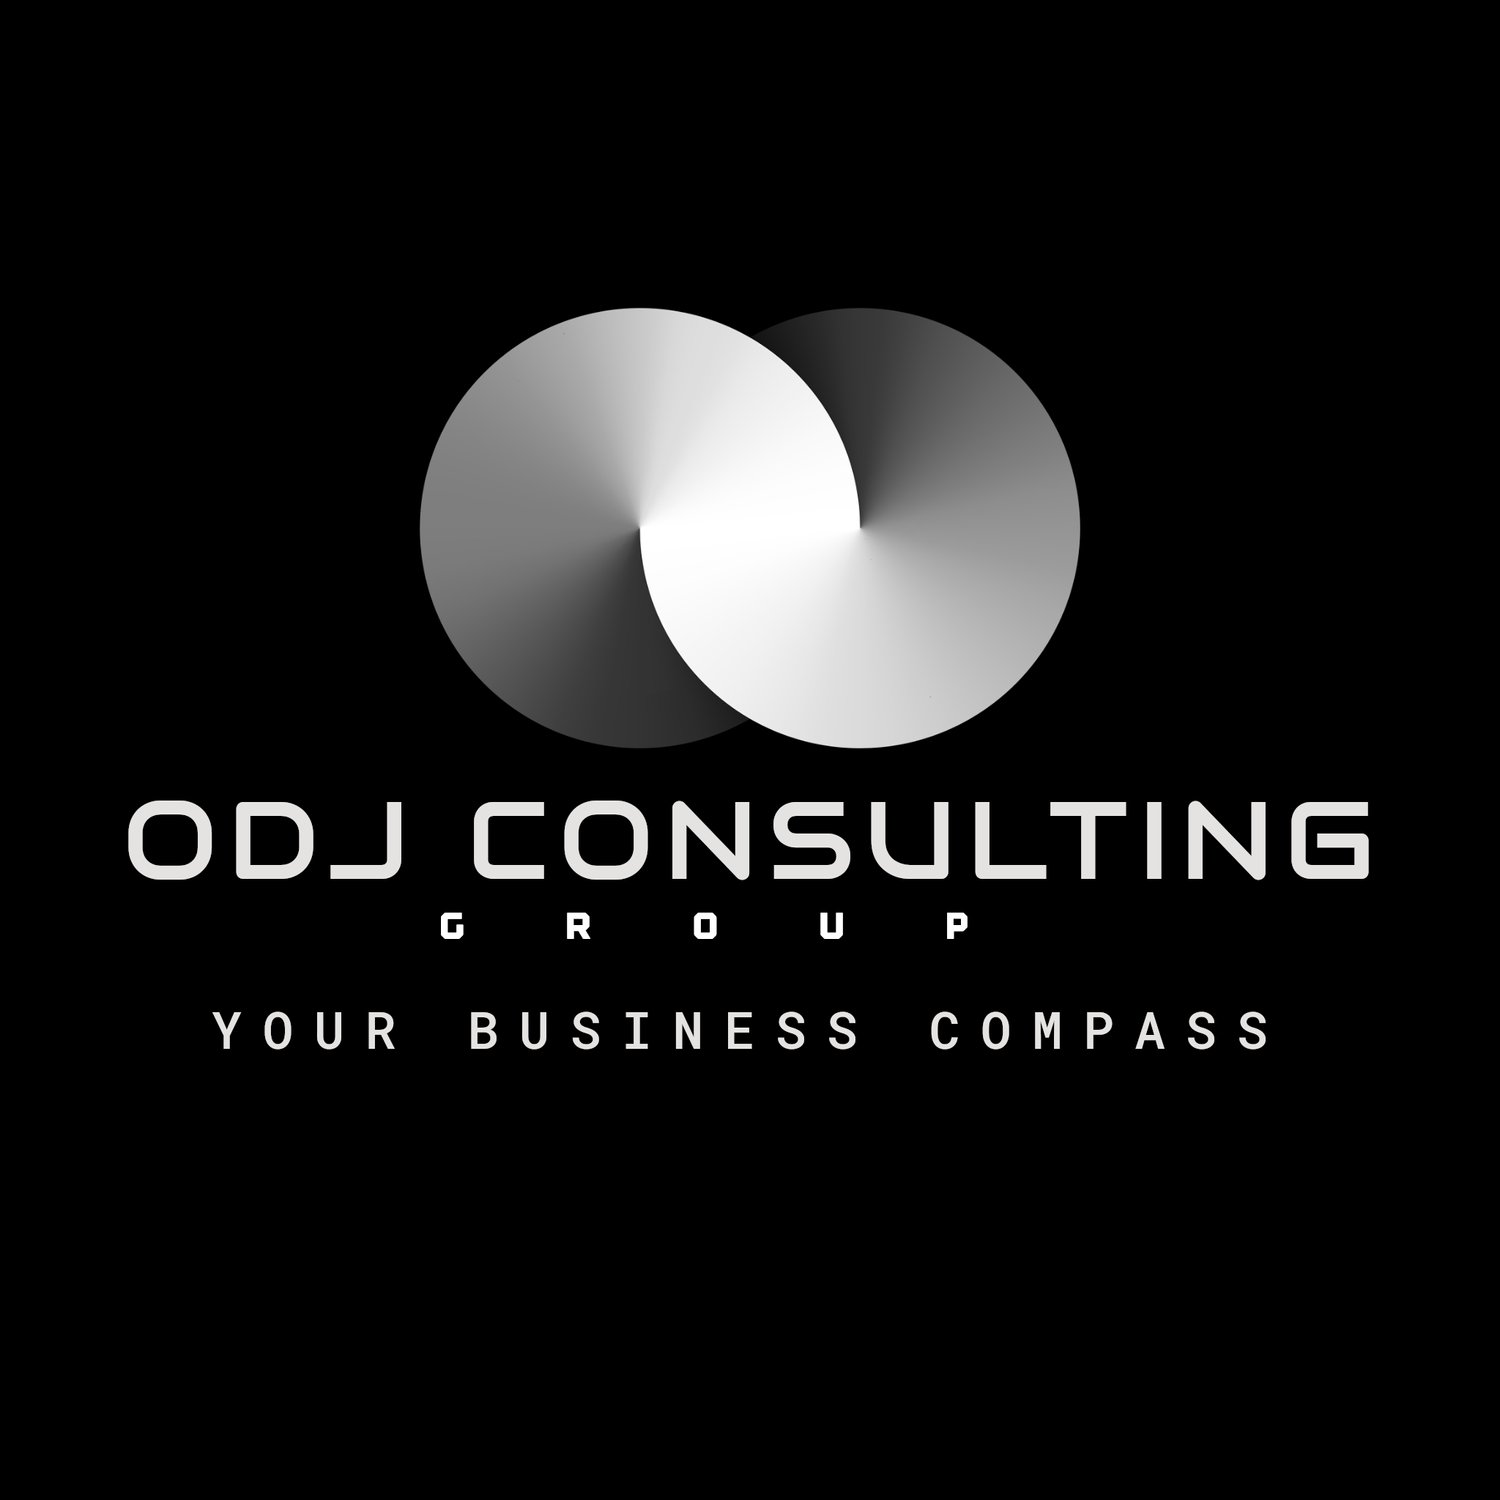 ODJ Consulting Group, LLC